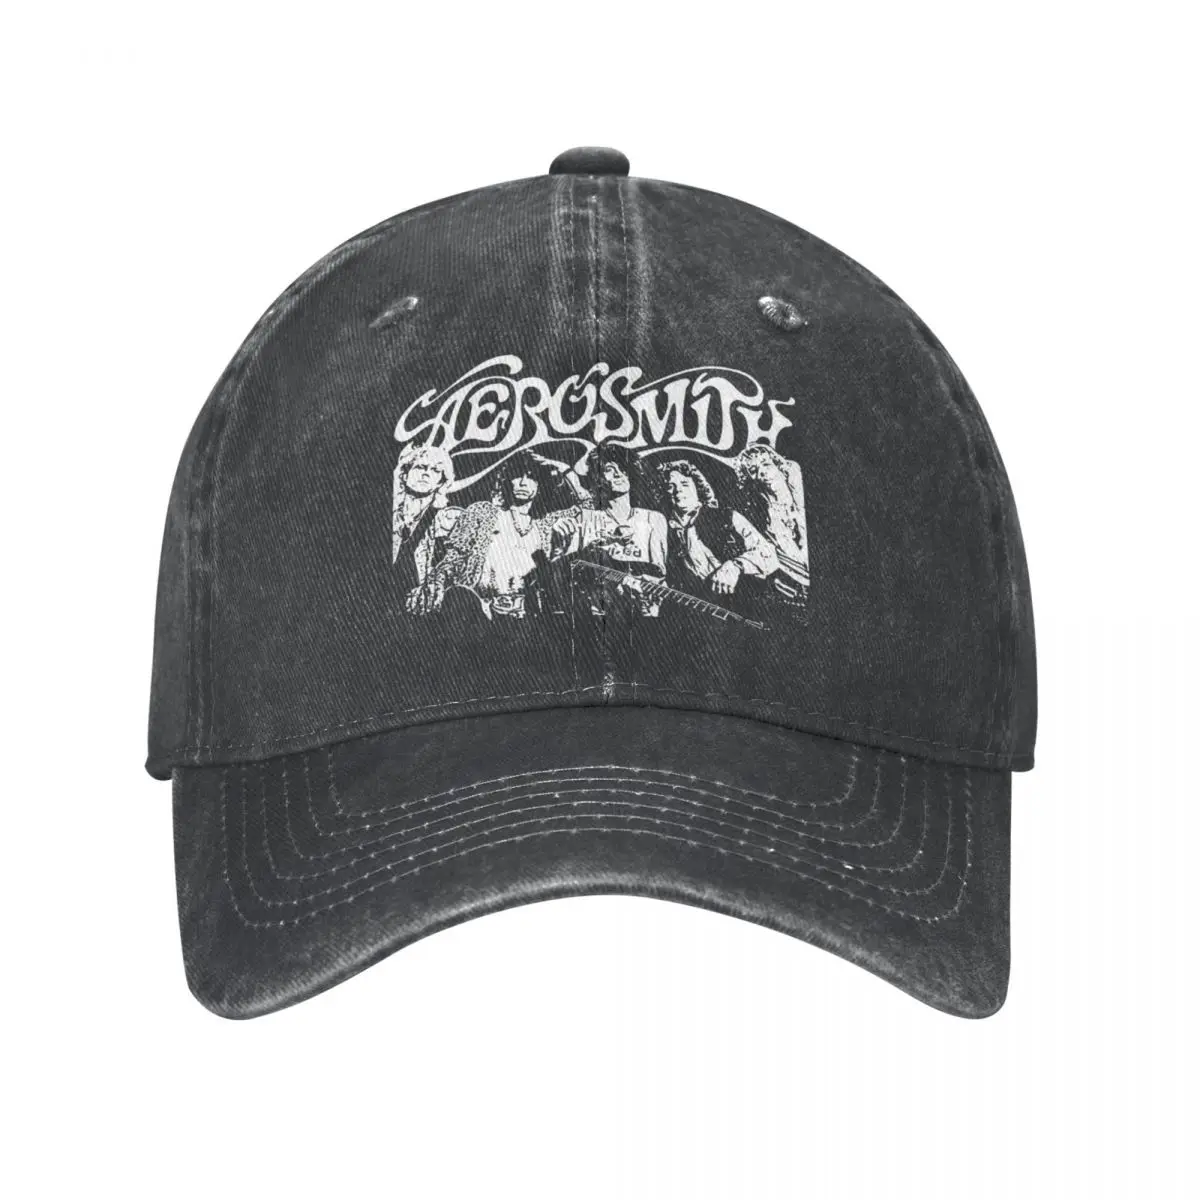 

Fashion Retro Music Rocks Aerosmith Band Hat for Men Women Distressed Washed Snapback Cap Heavy Metal Outdoor Workouts Hats Cap